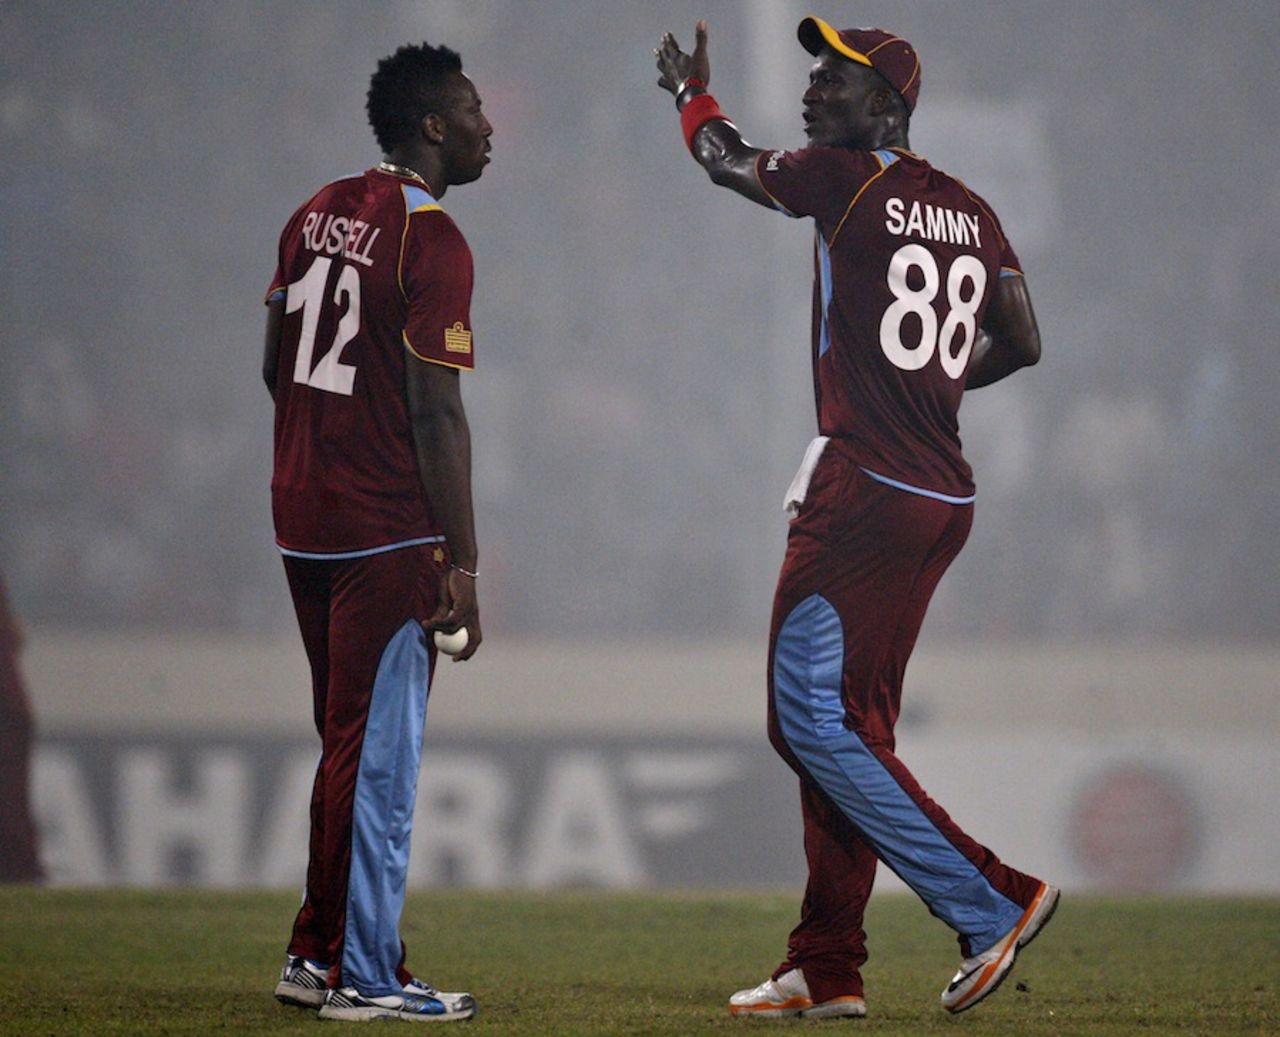 Darren Sammy has a word with Andre Russell, Bangladesh v West Indies, 5th ODI, Mirpur, December 8, 2012